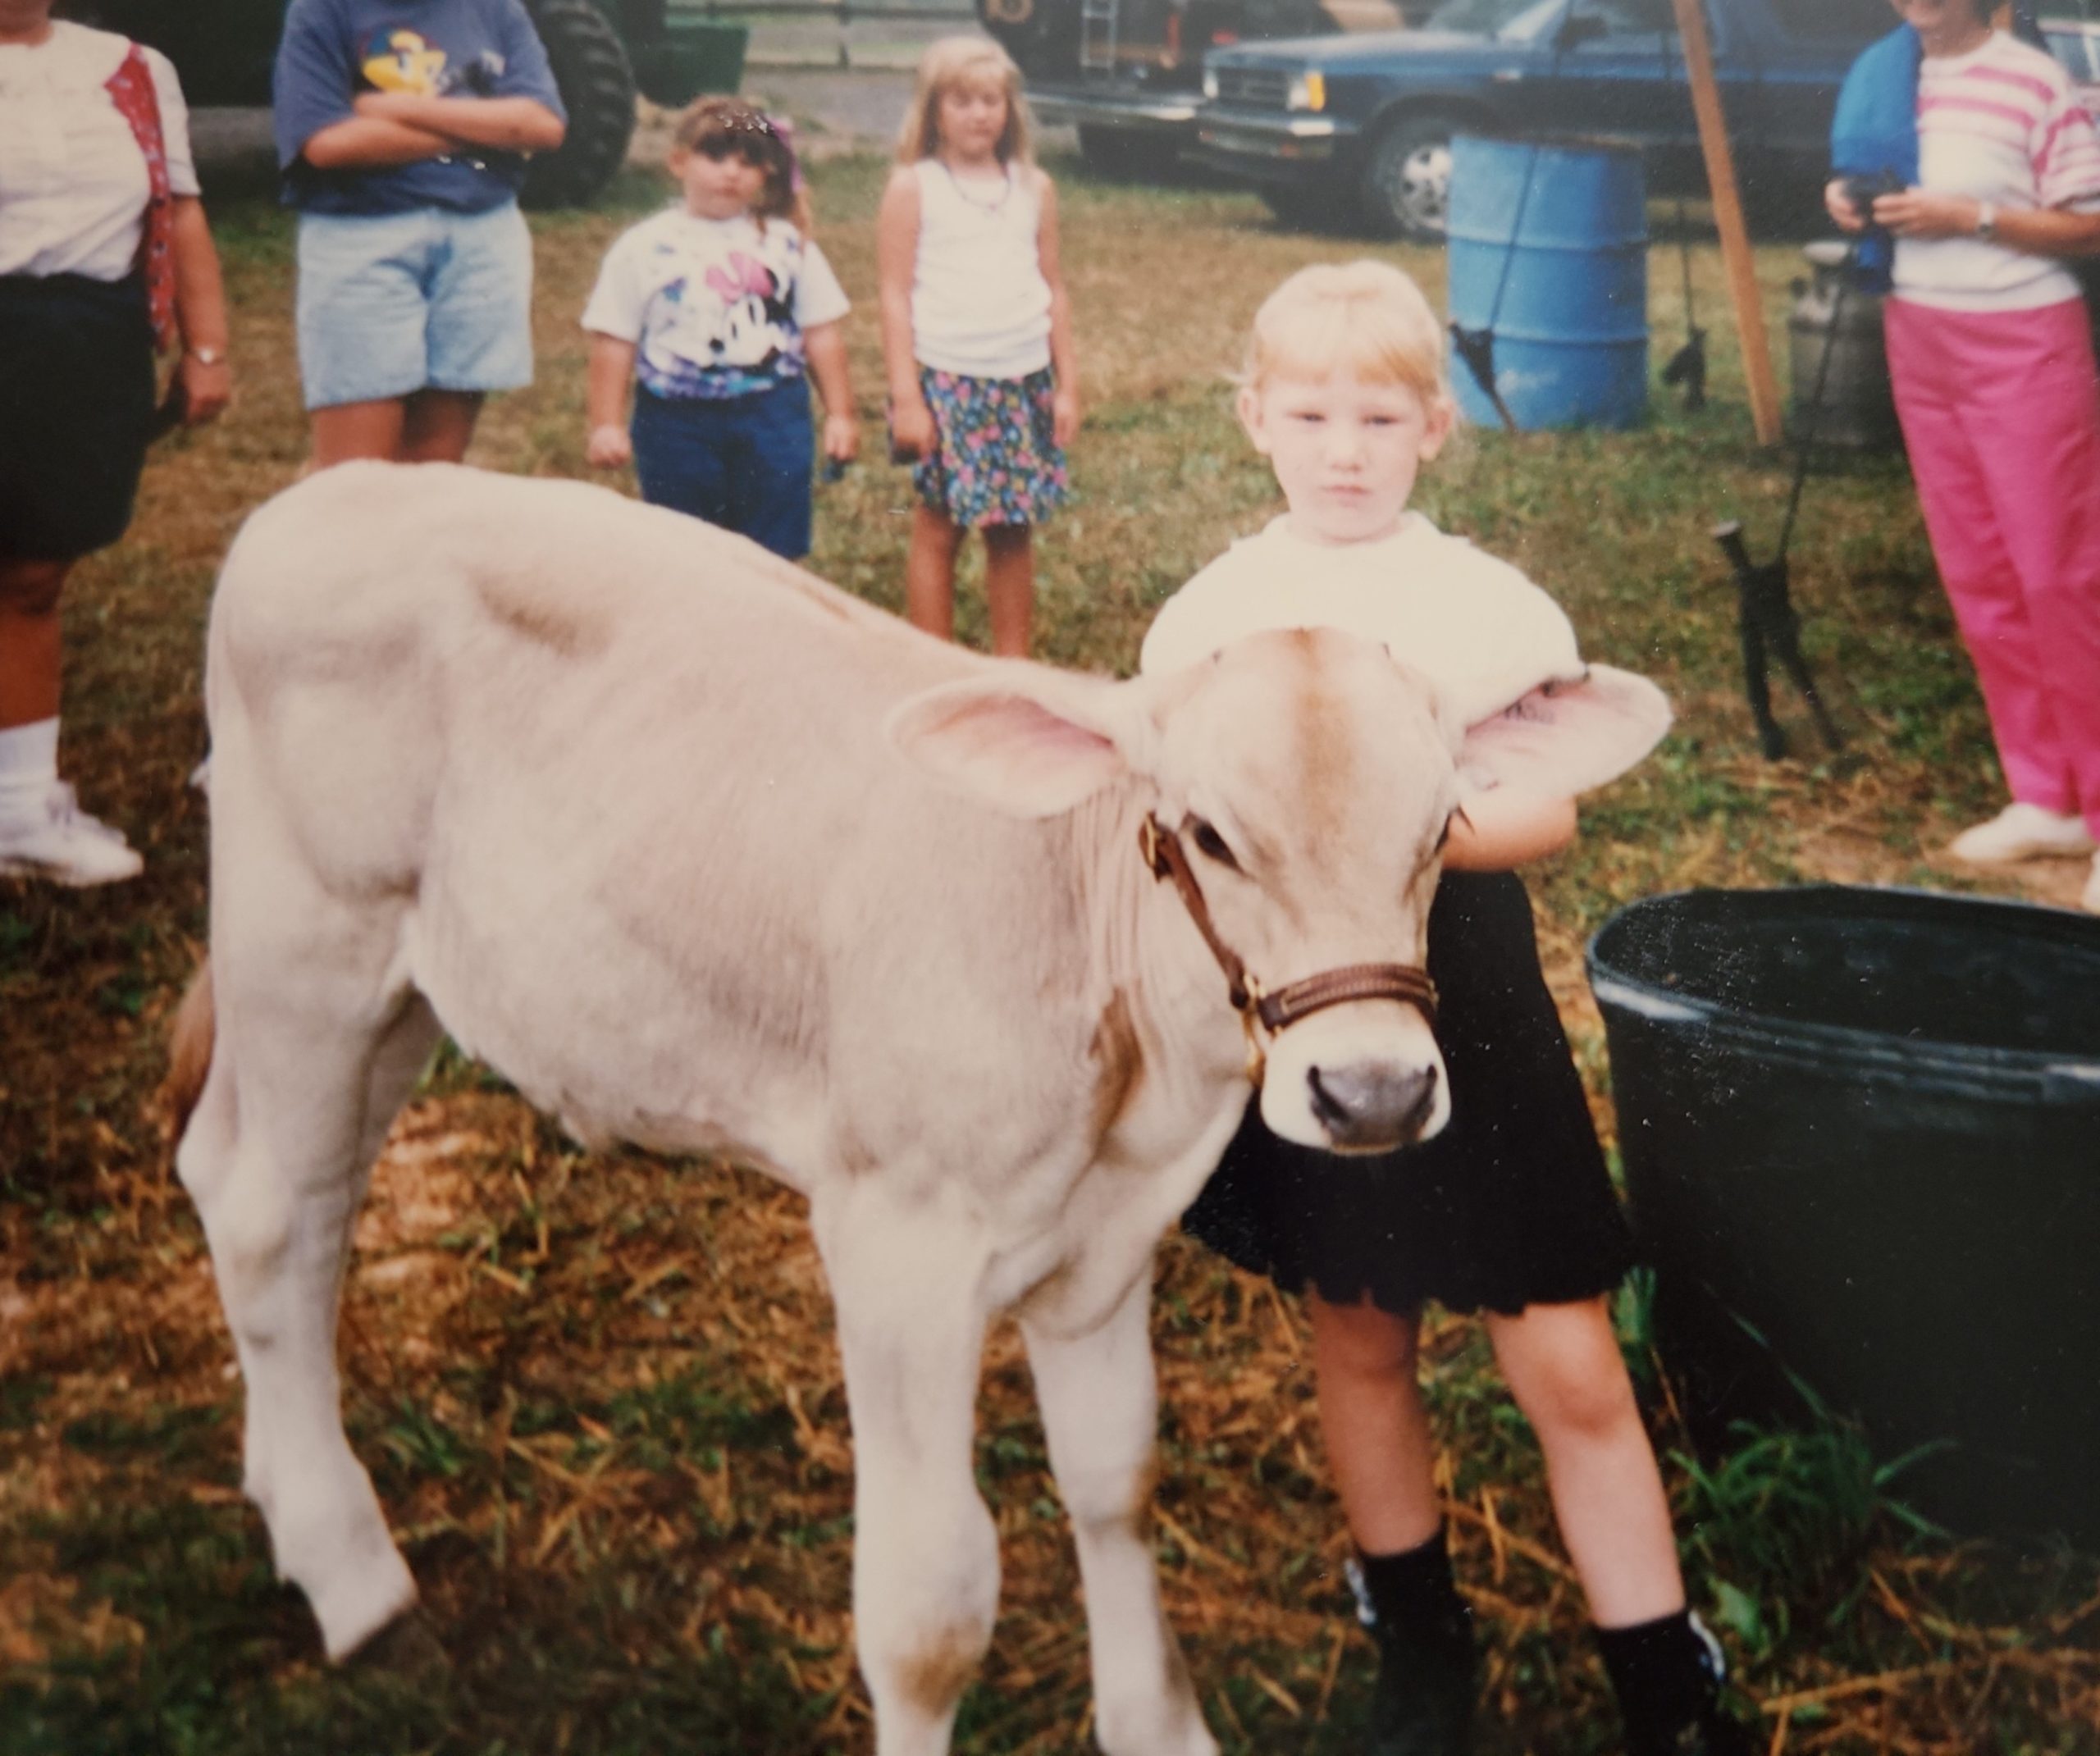 A girl standing next to a calf in a field, in the background a group of people and a couple of girls.